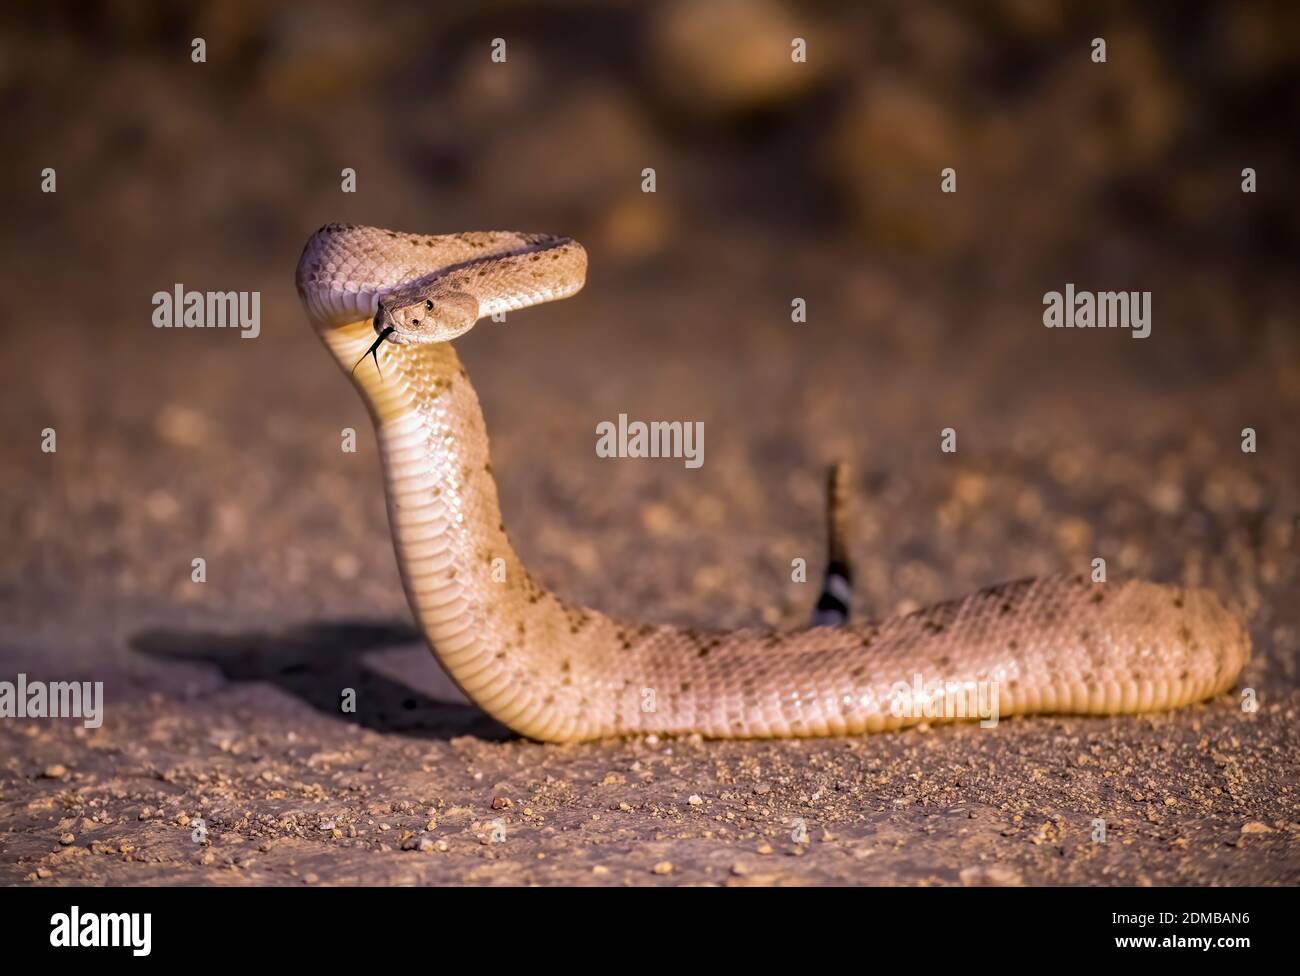 Western diamondback rattlesnake up in defensive position in low angle close up.  Taken on dirt road in Arizona. Stock Photo